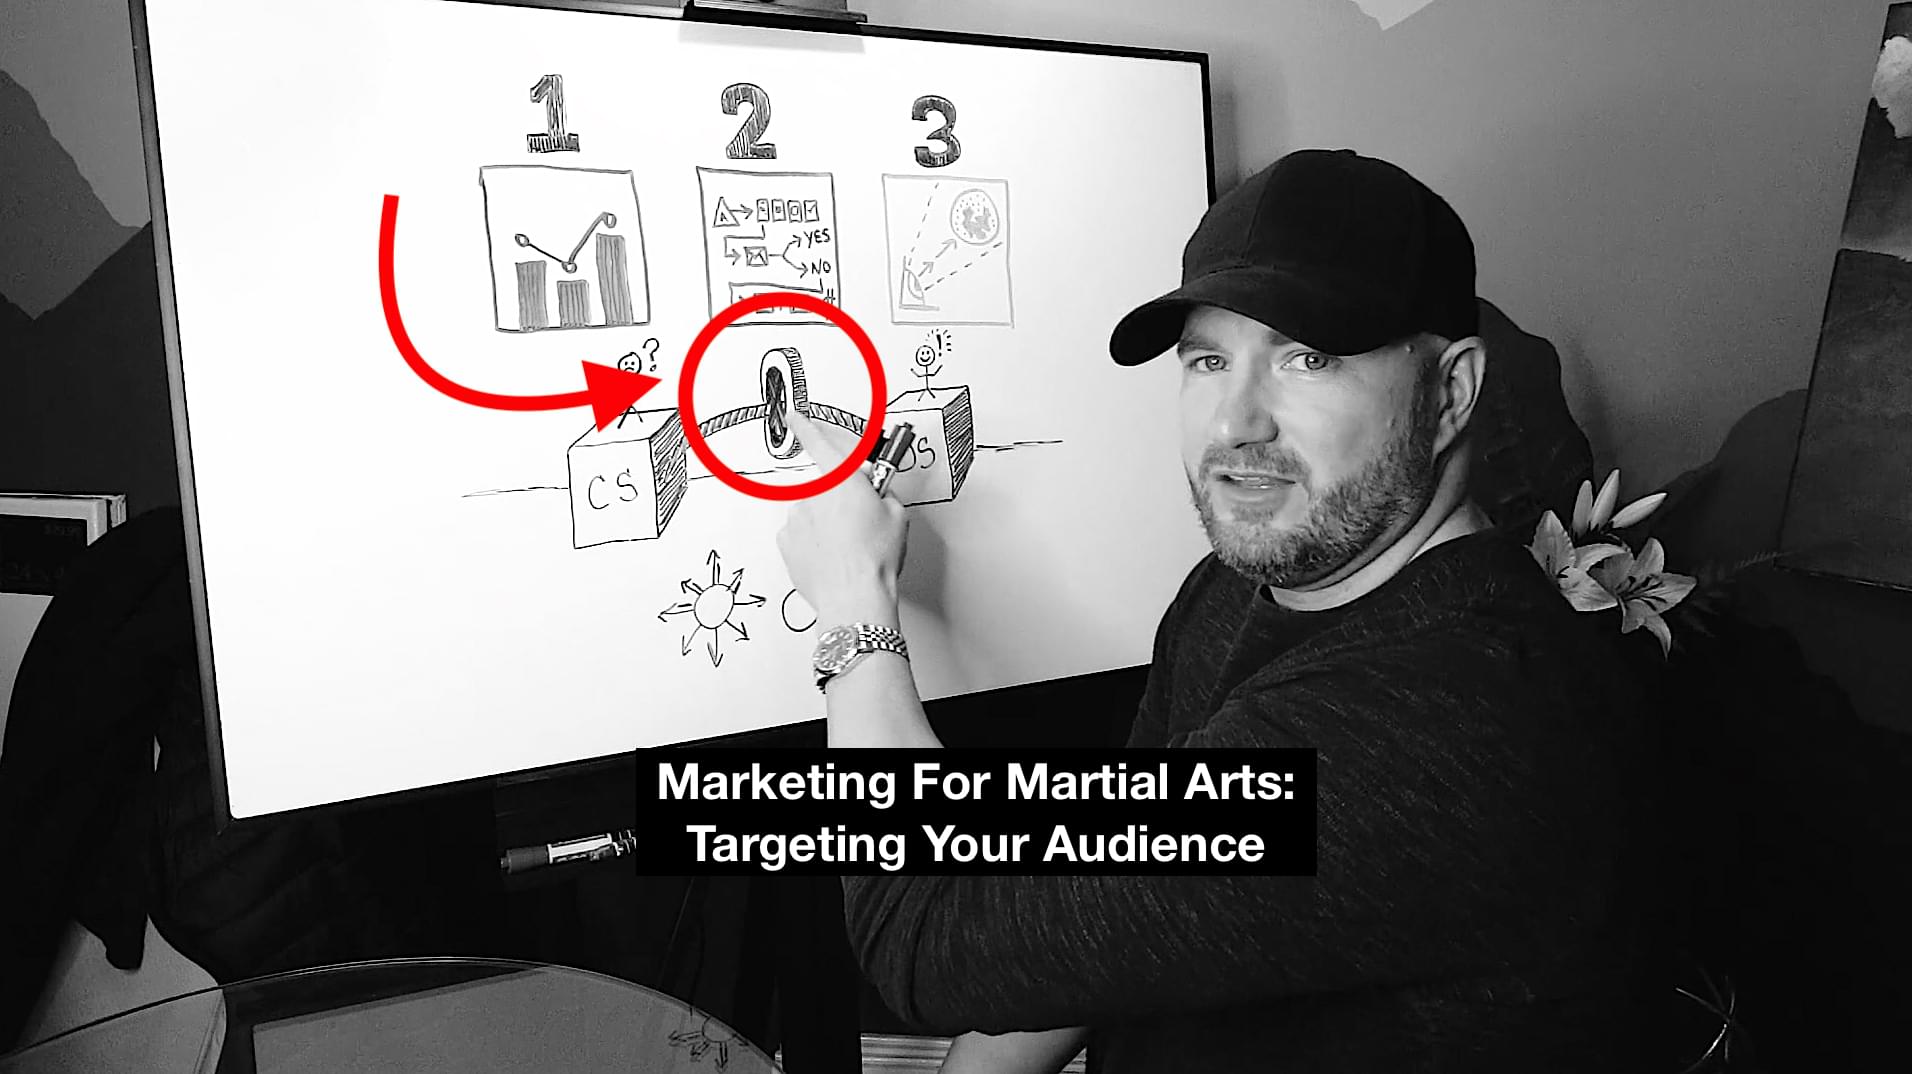 Marketing for Martial Arts: How To Target Your Audience